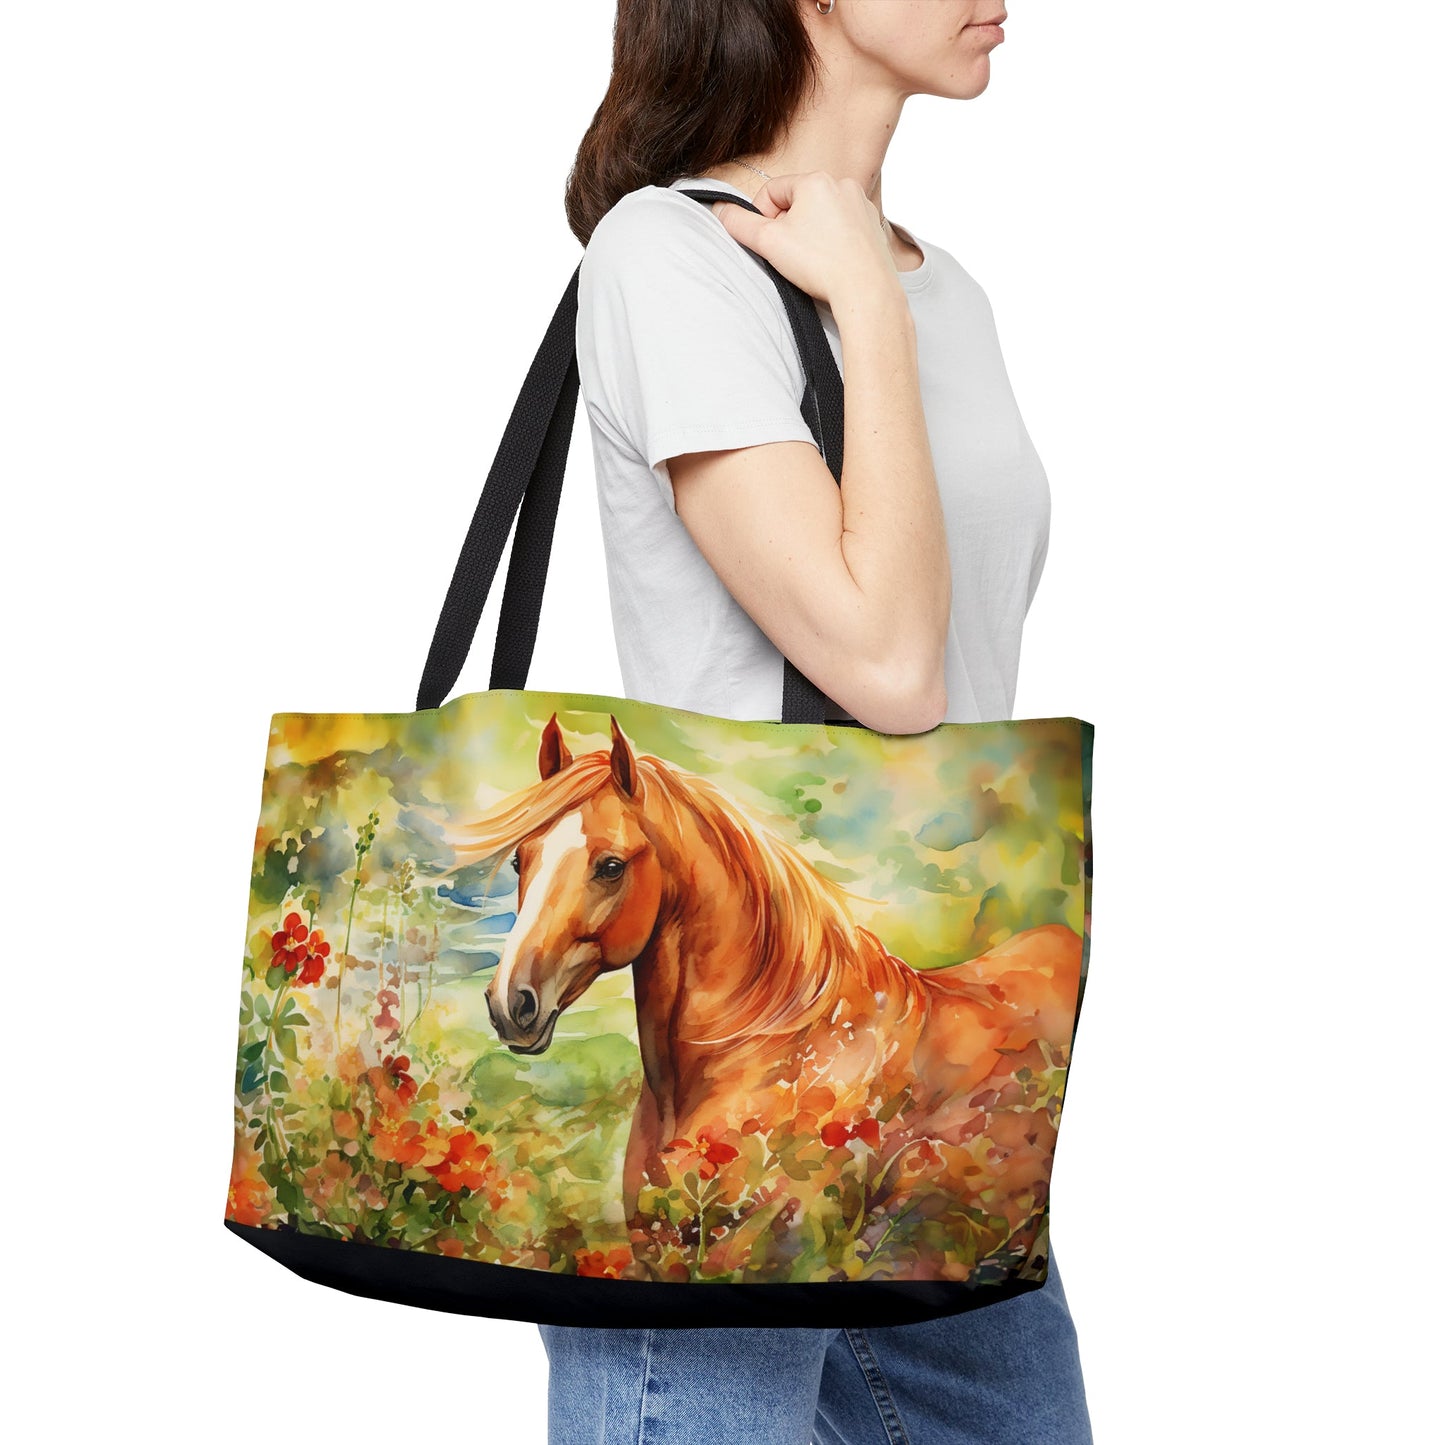 Horse and Garden Print on Extra Large Weekender Tote Bag, Watercolor Art Overnight Carry All Bag - FlooredByArt